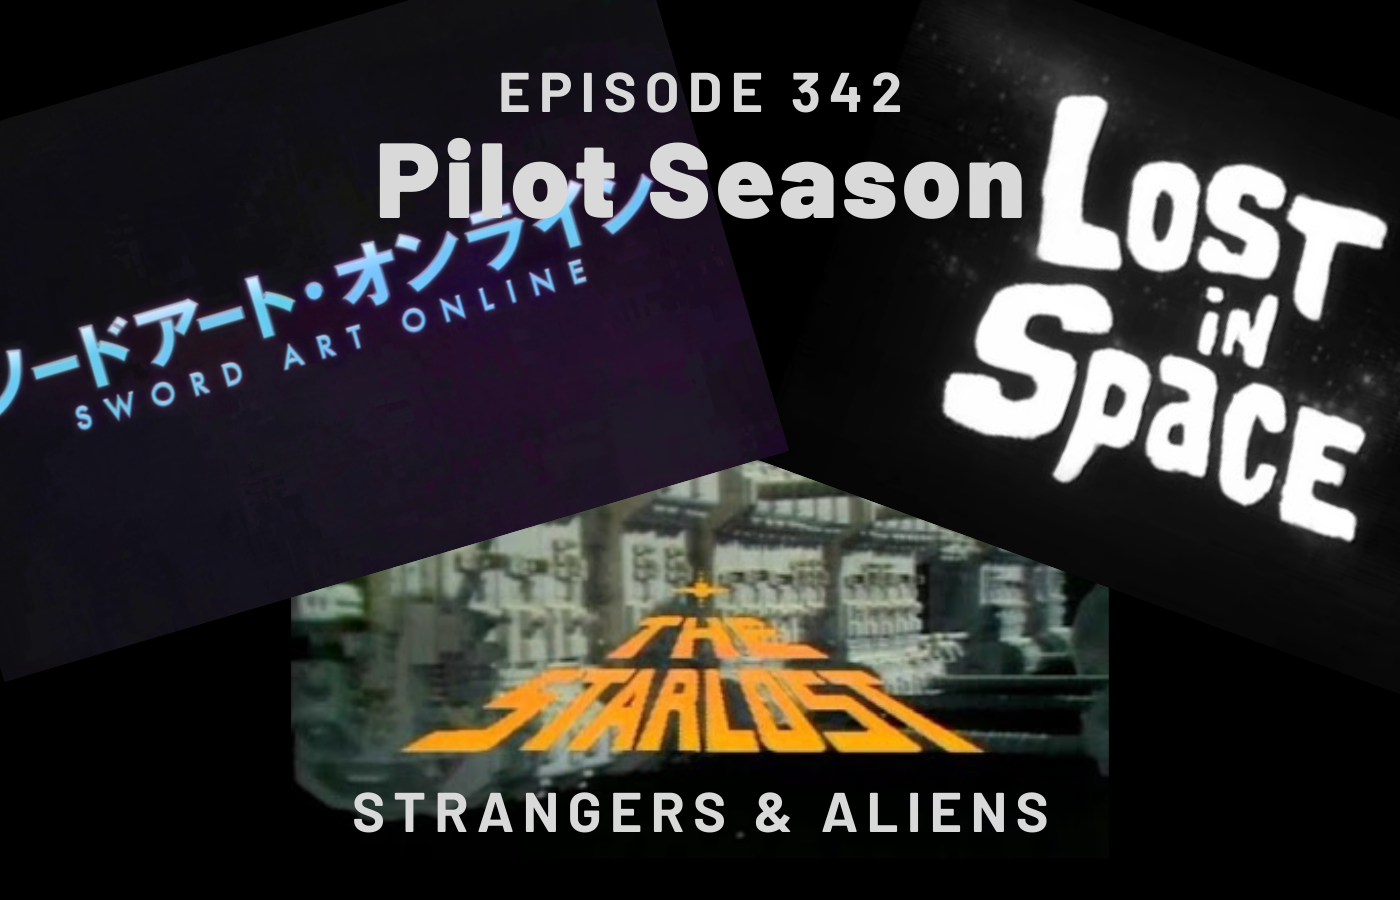 THE STARLOST, LOST IN SPACE, and SWORD ART ONLINE (Pilot Season Series) – SA342